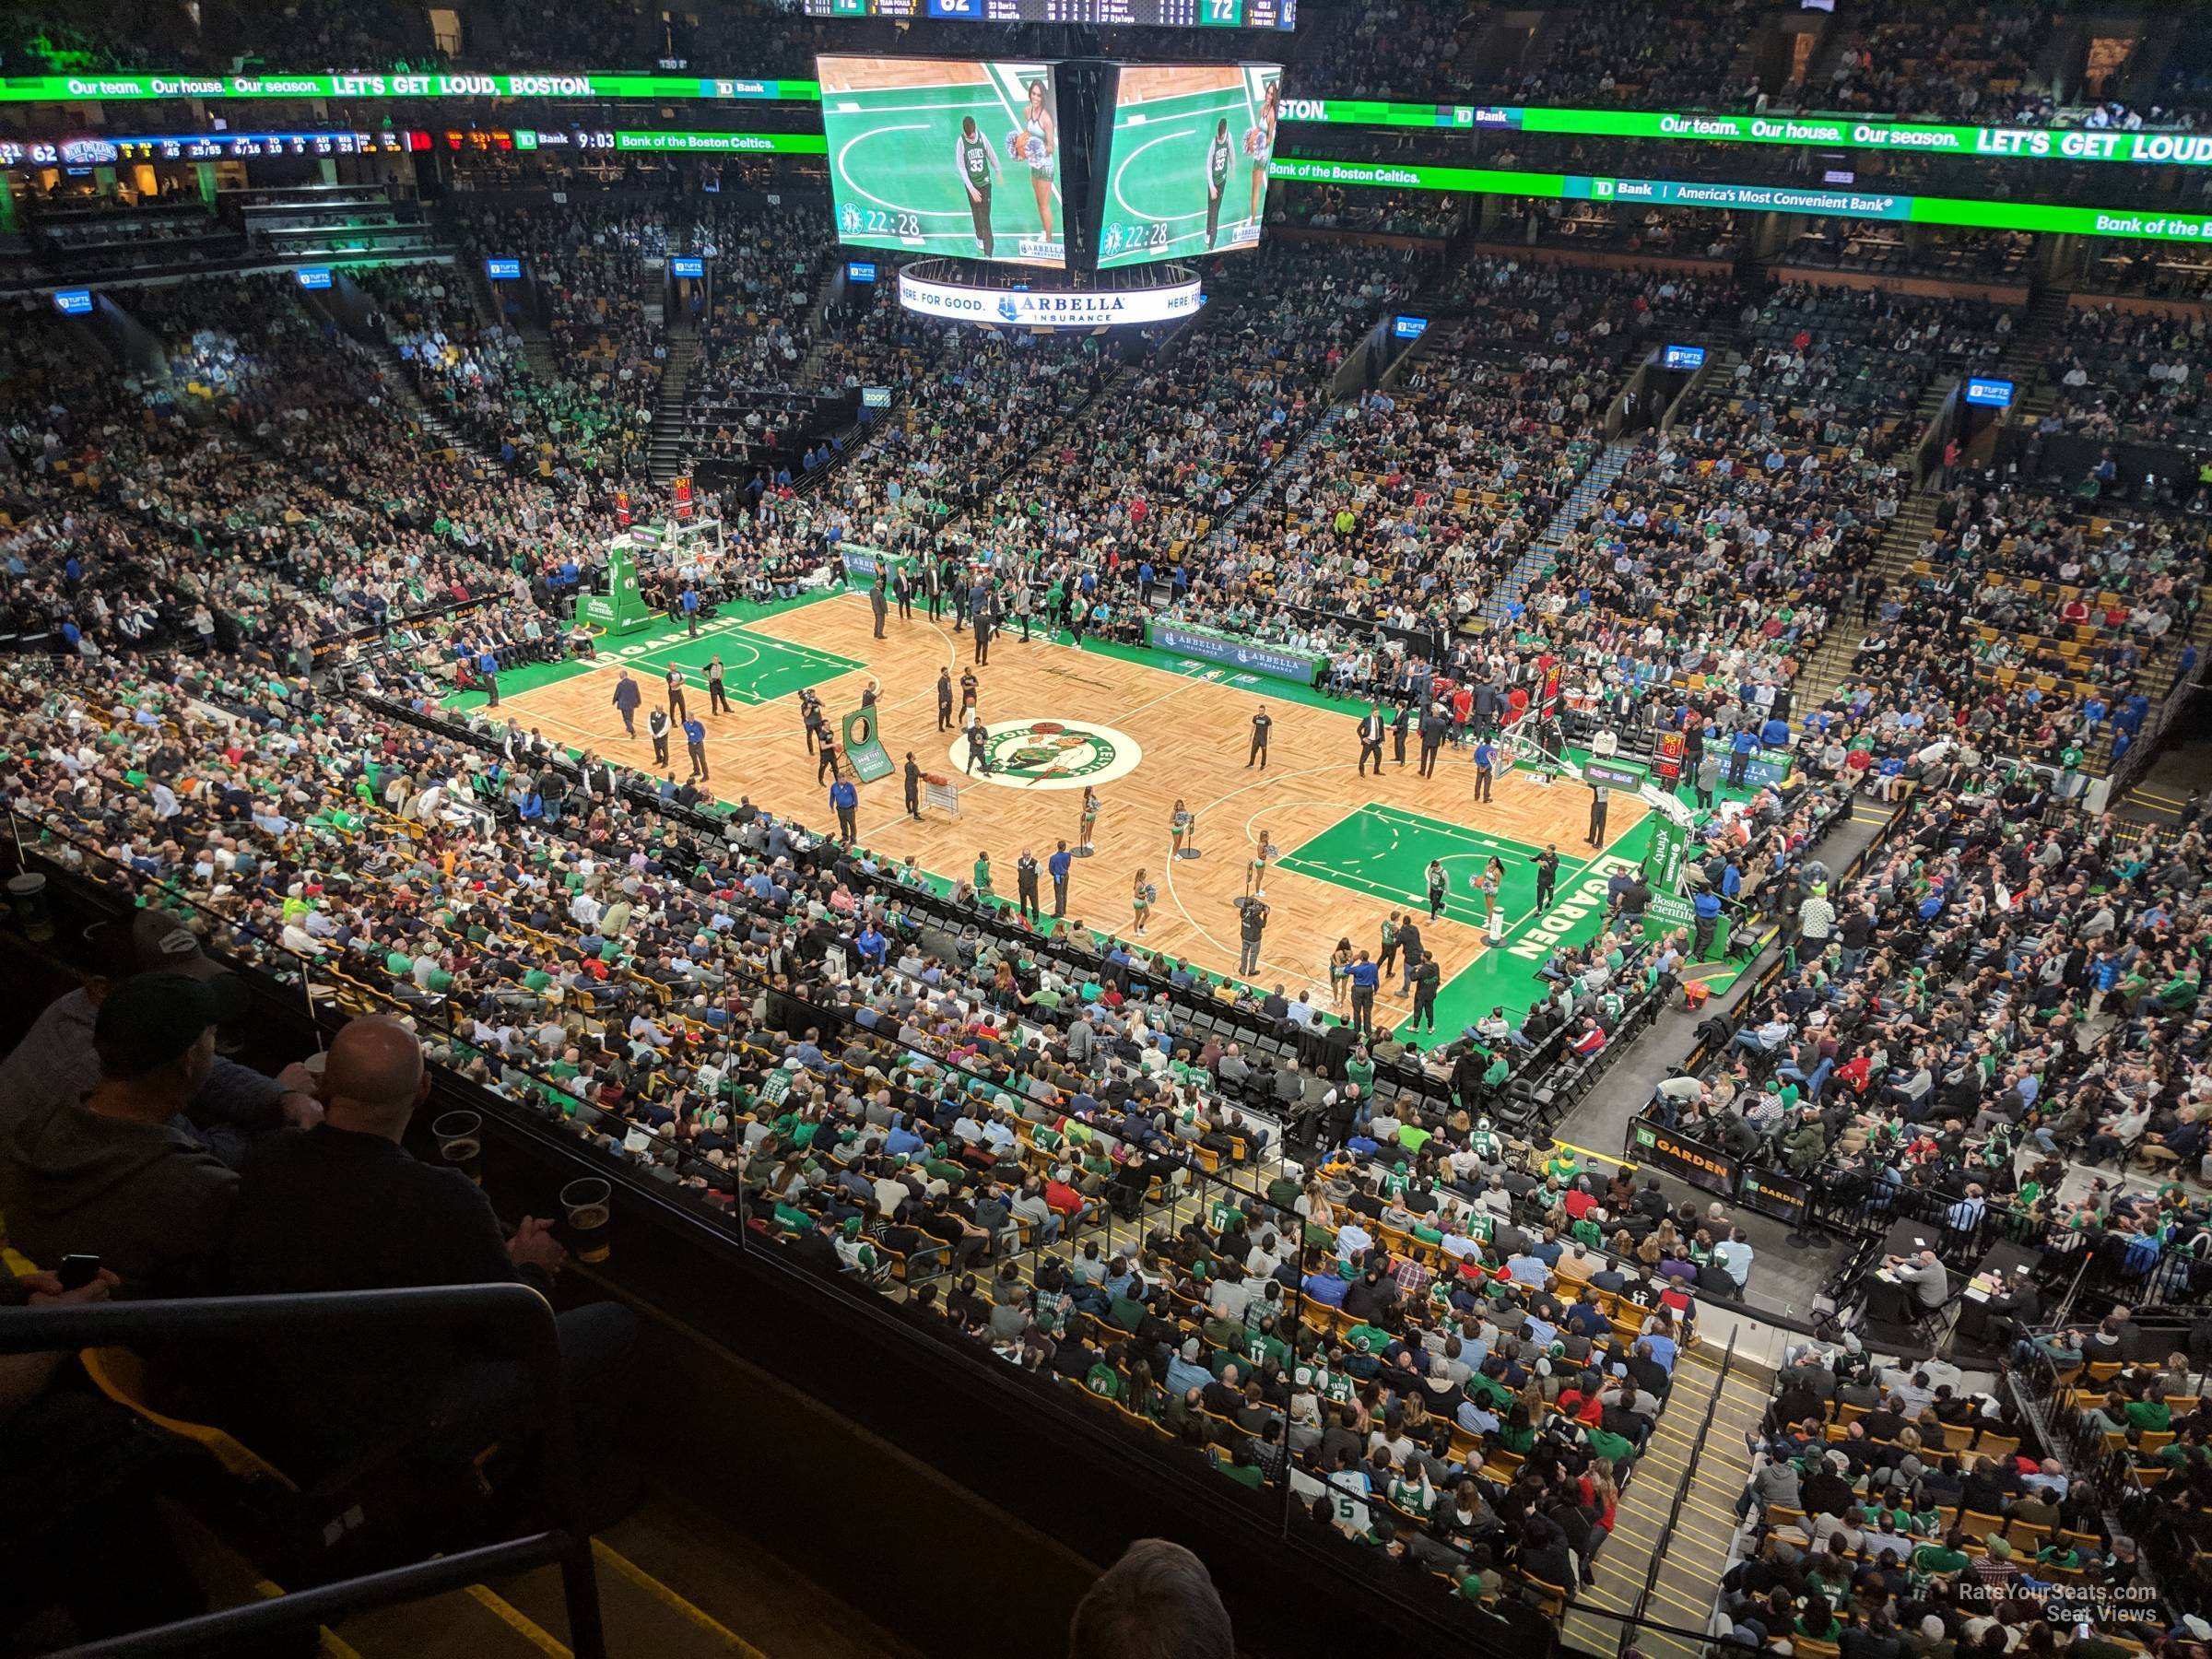 section 313, row 3 seat view  for basketball - td garden